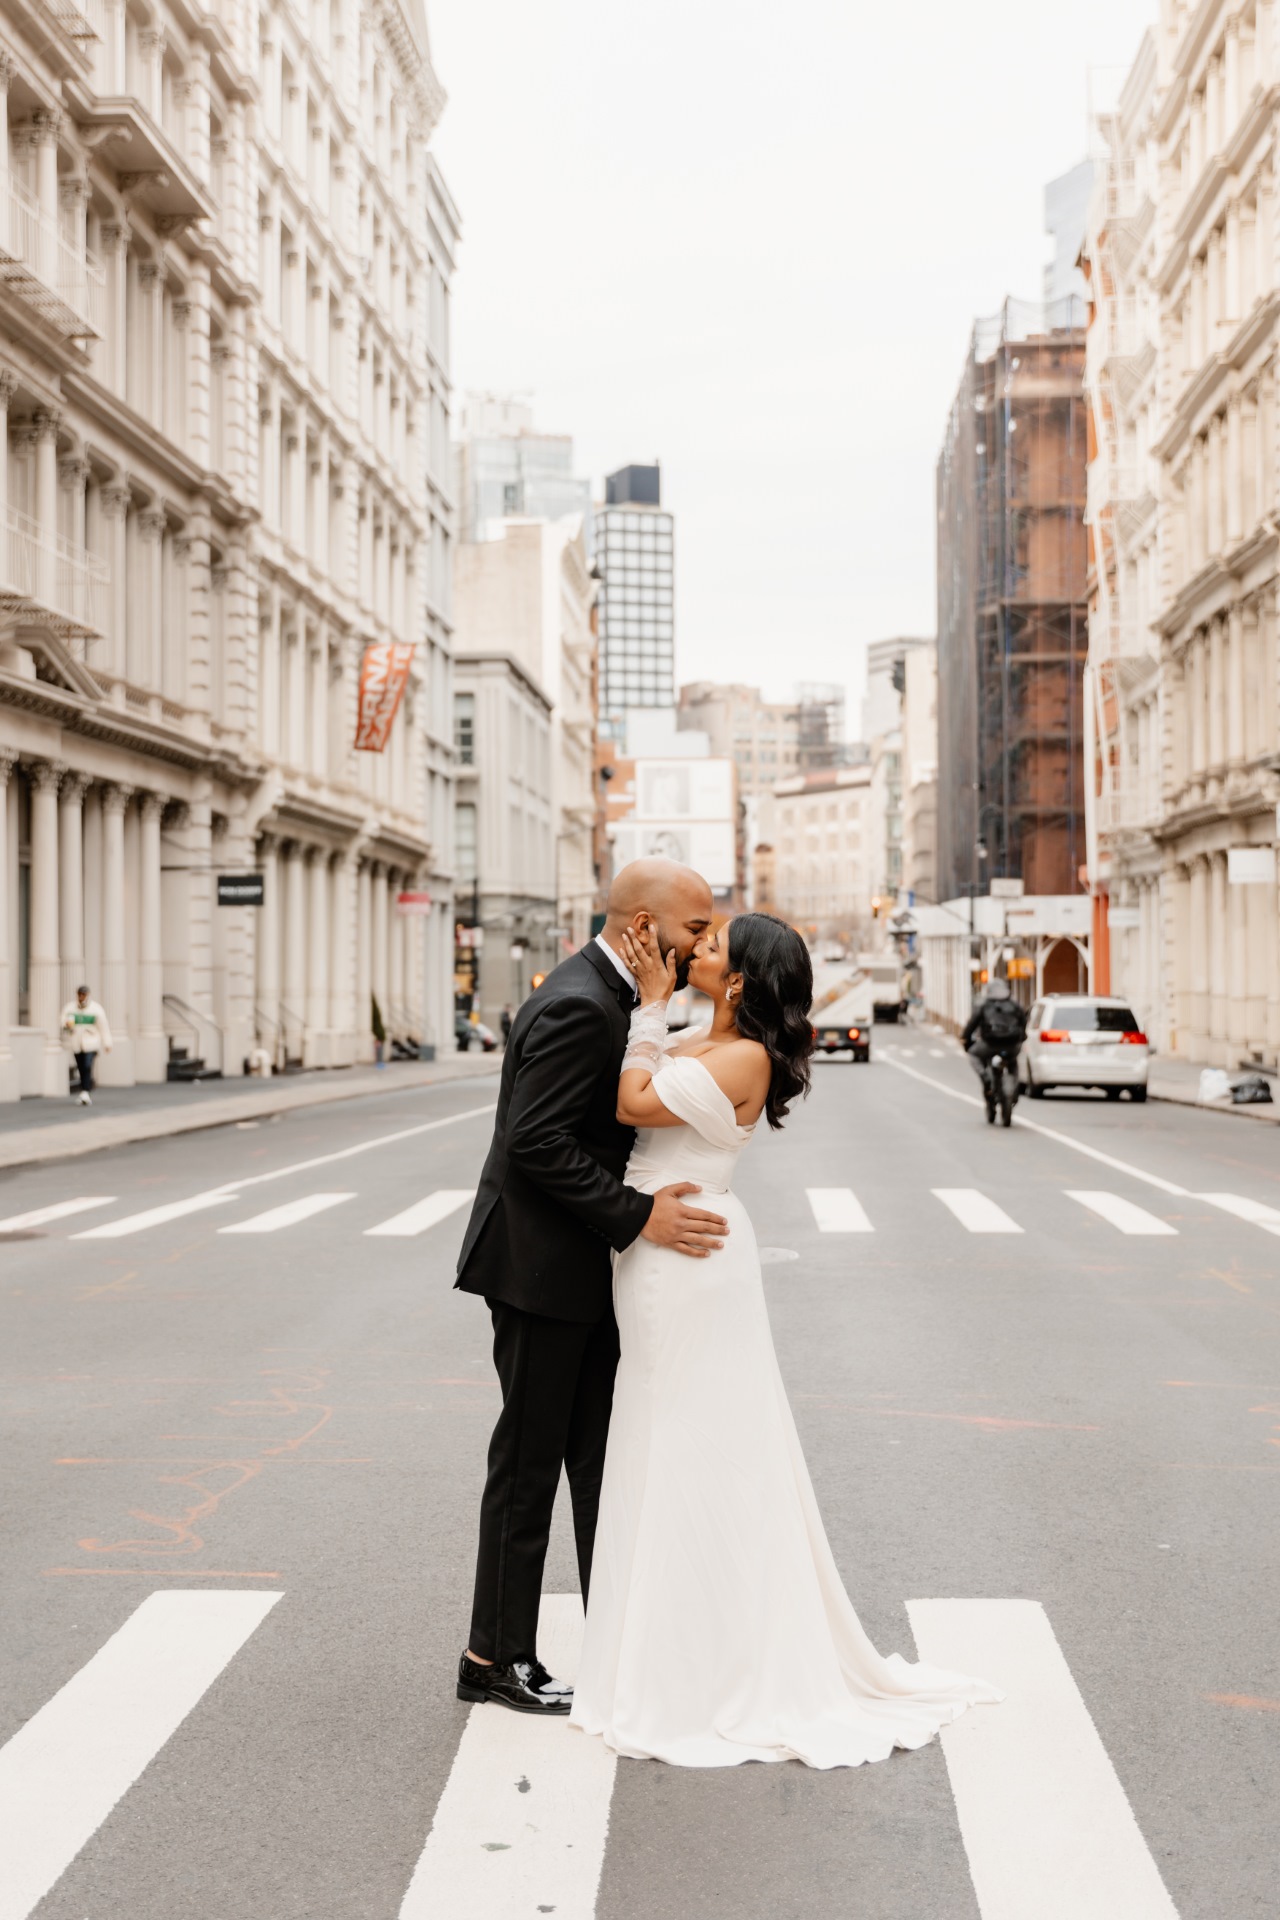 Engagement photos in soho nyc (1)